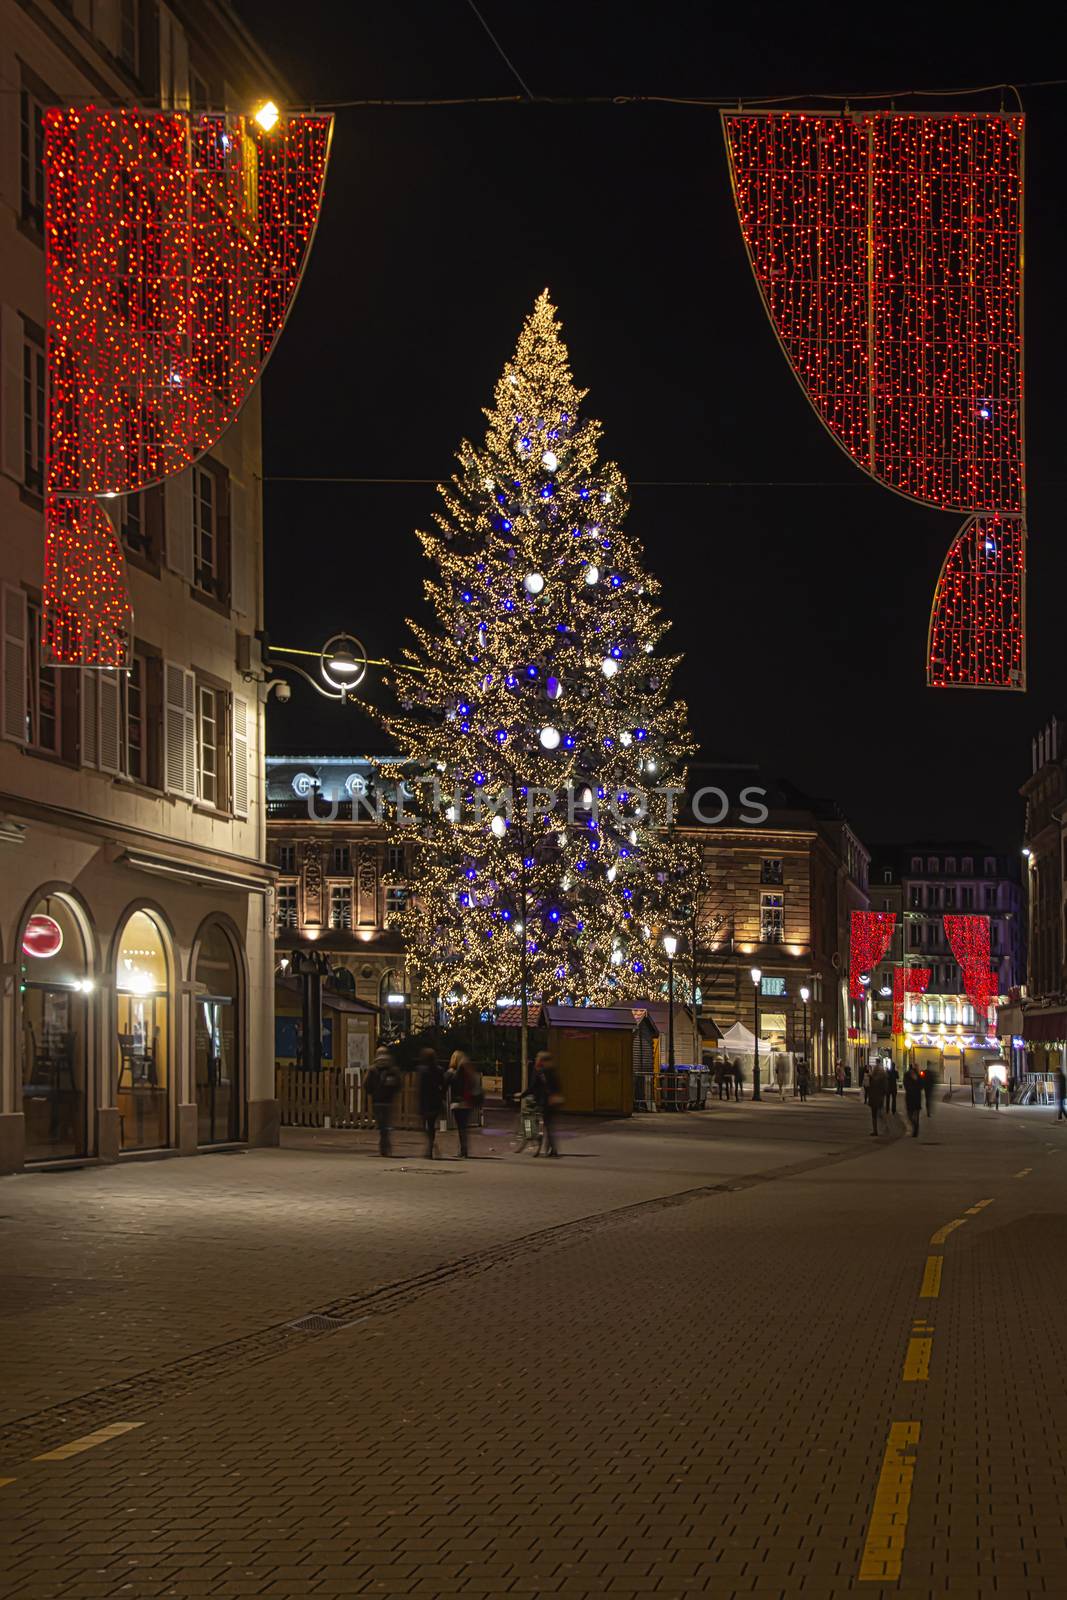 Giant Christmas tree at the Kleber place in Strasbourg city at night during the year end celebration, Strasbourg, France by ankorlight